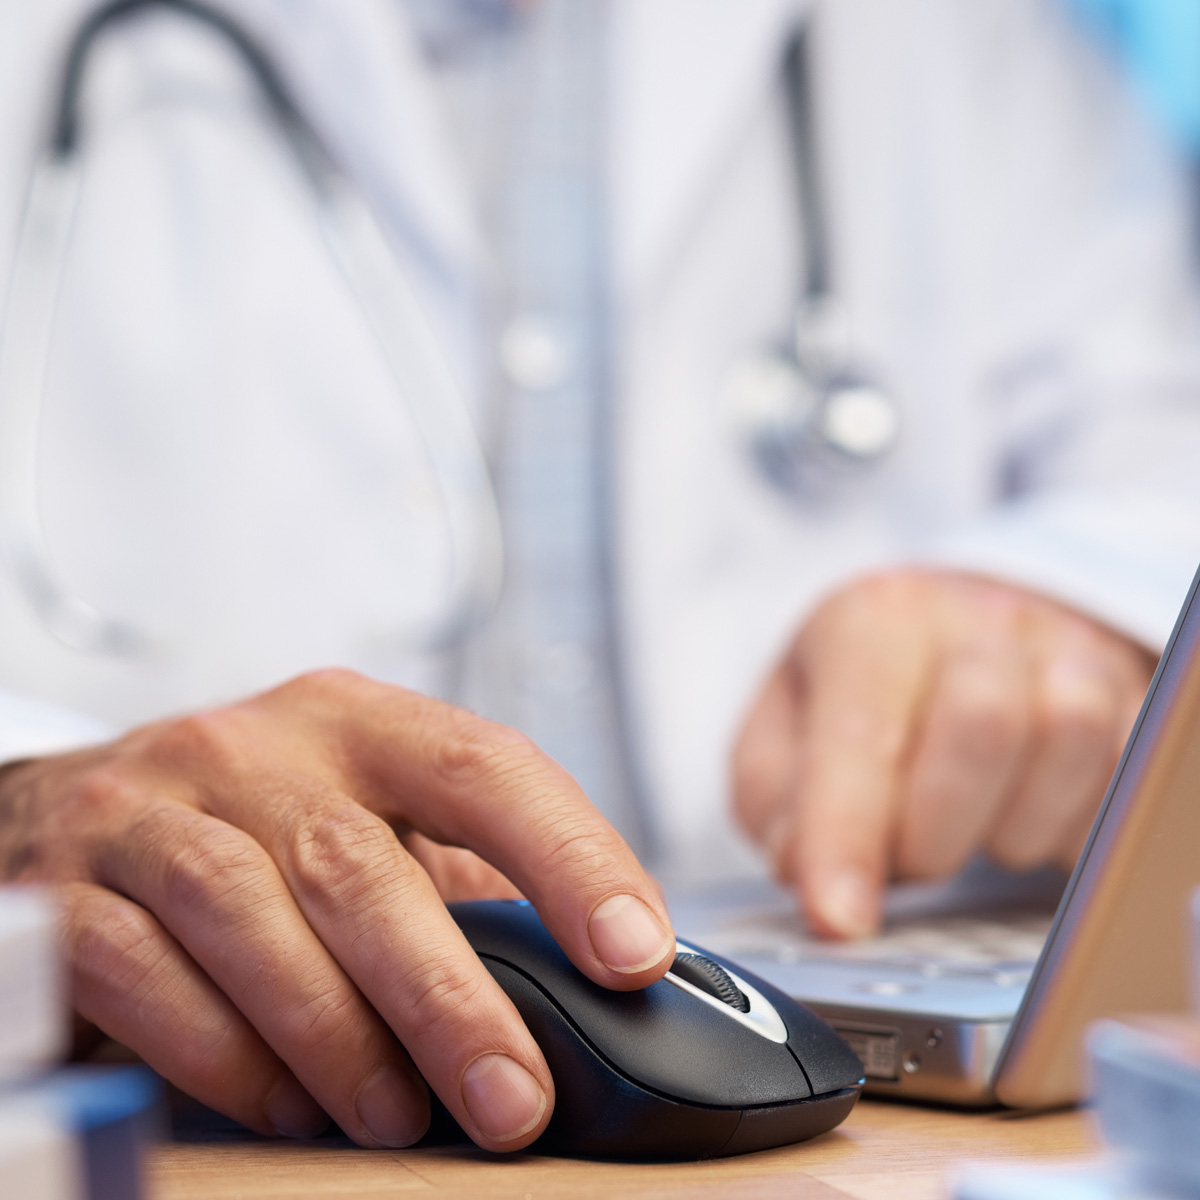 A doctor clicks on a computer mouse in search of the preauthorization tool.